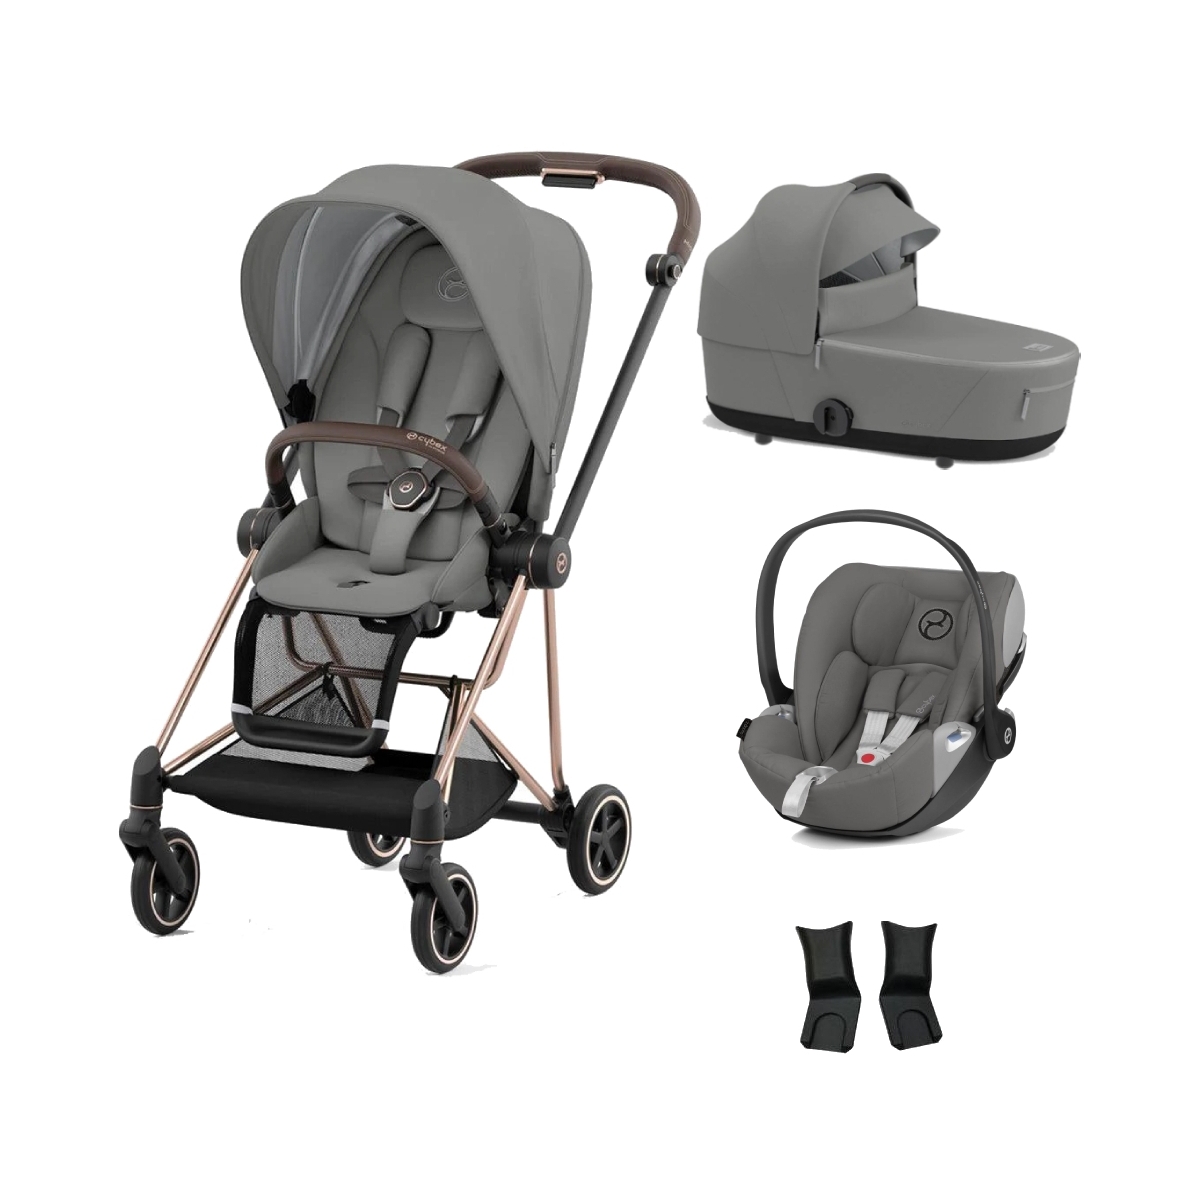 Cybex Mios Rose Gold Pushchair with Lux Carry Cot & Cloud Z Car Seat